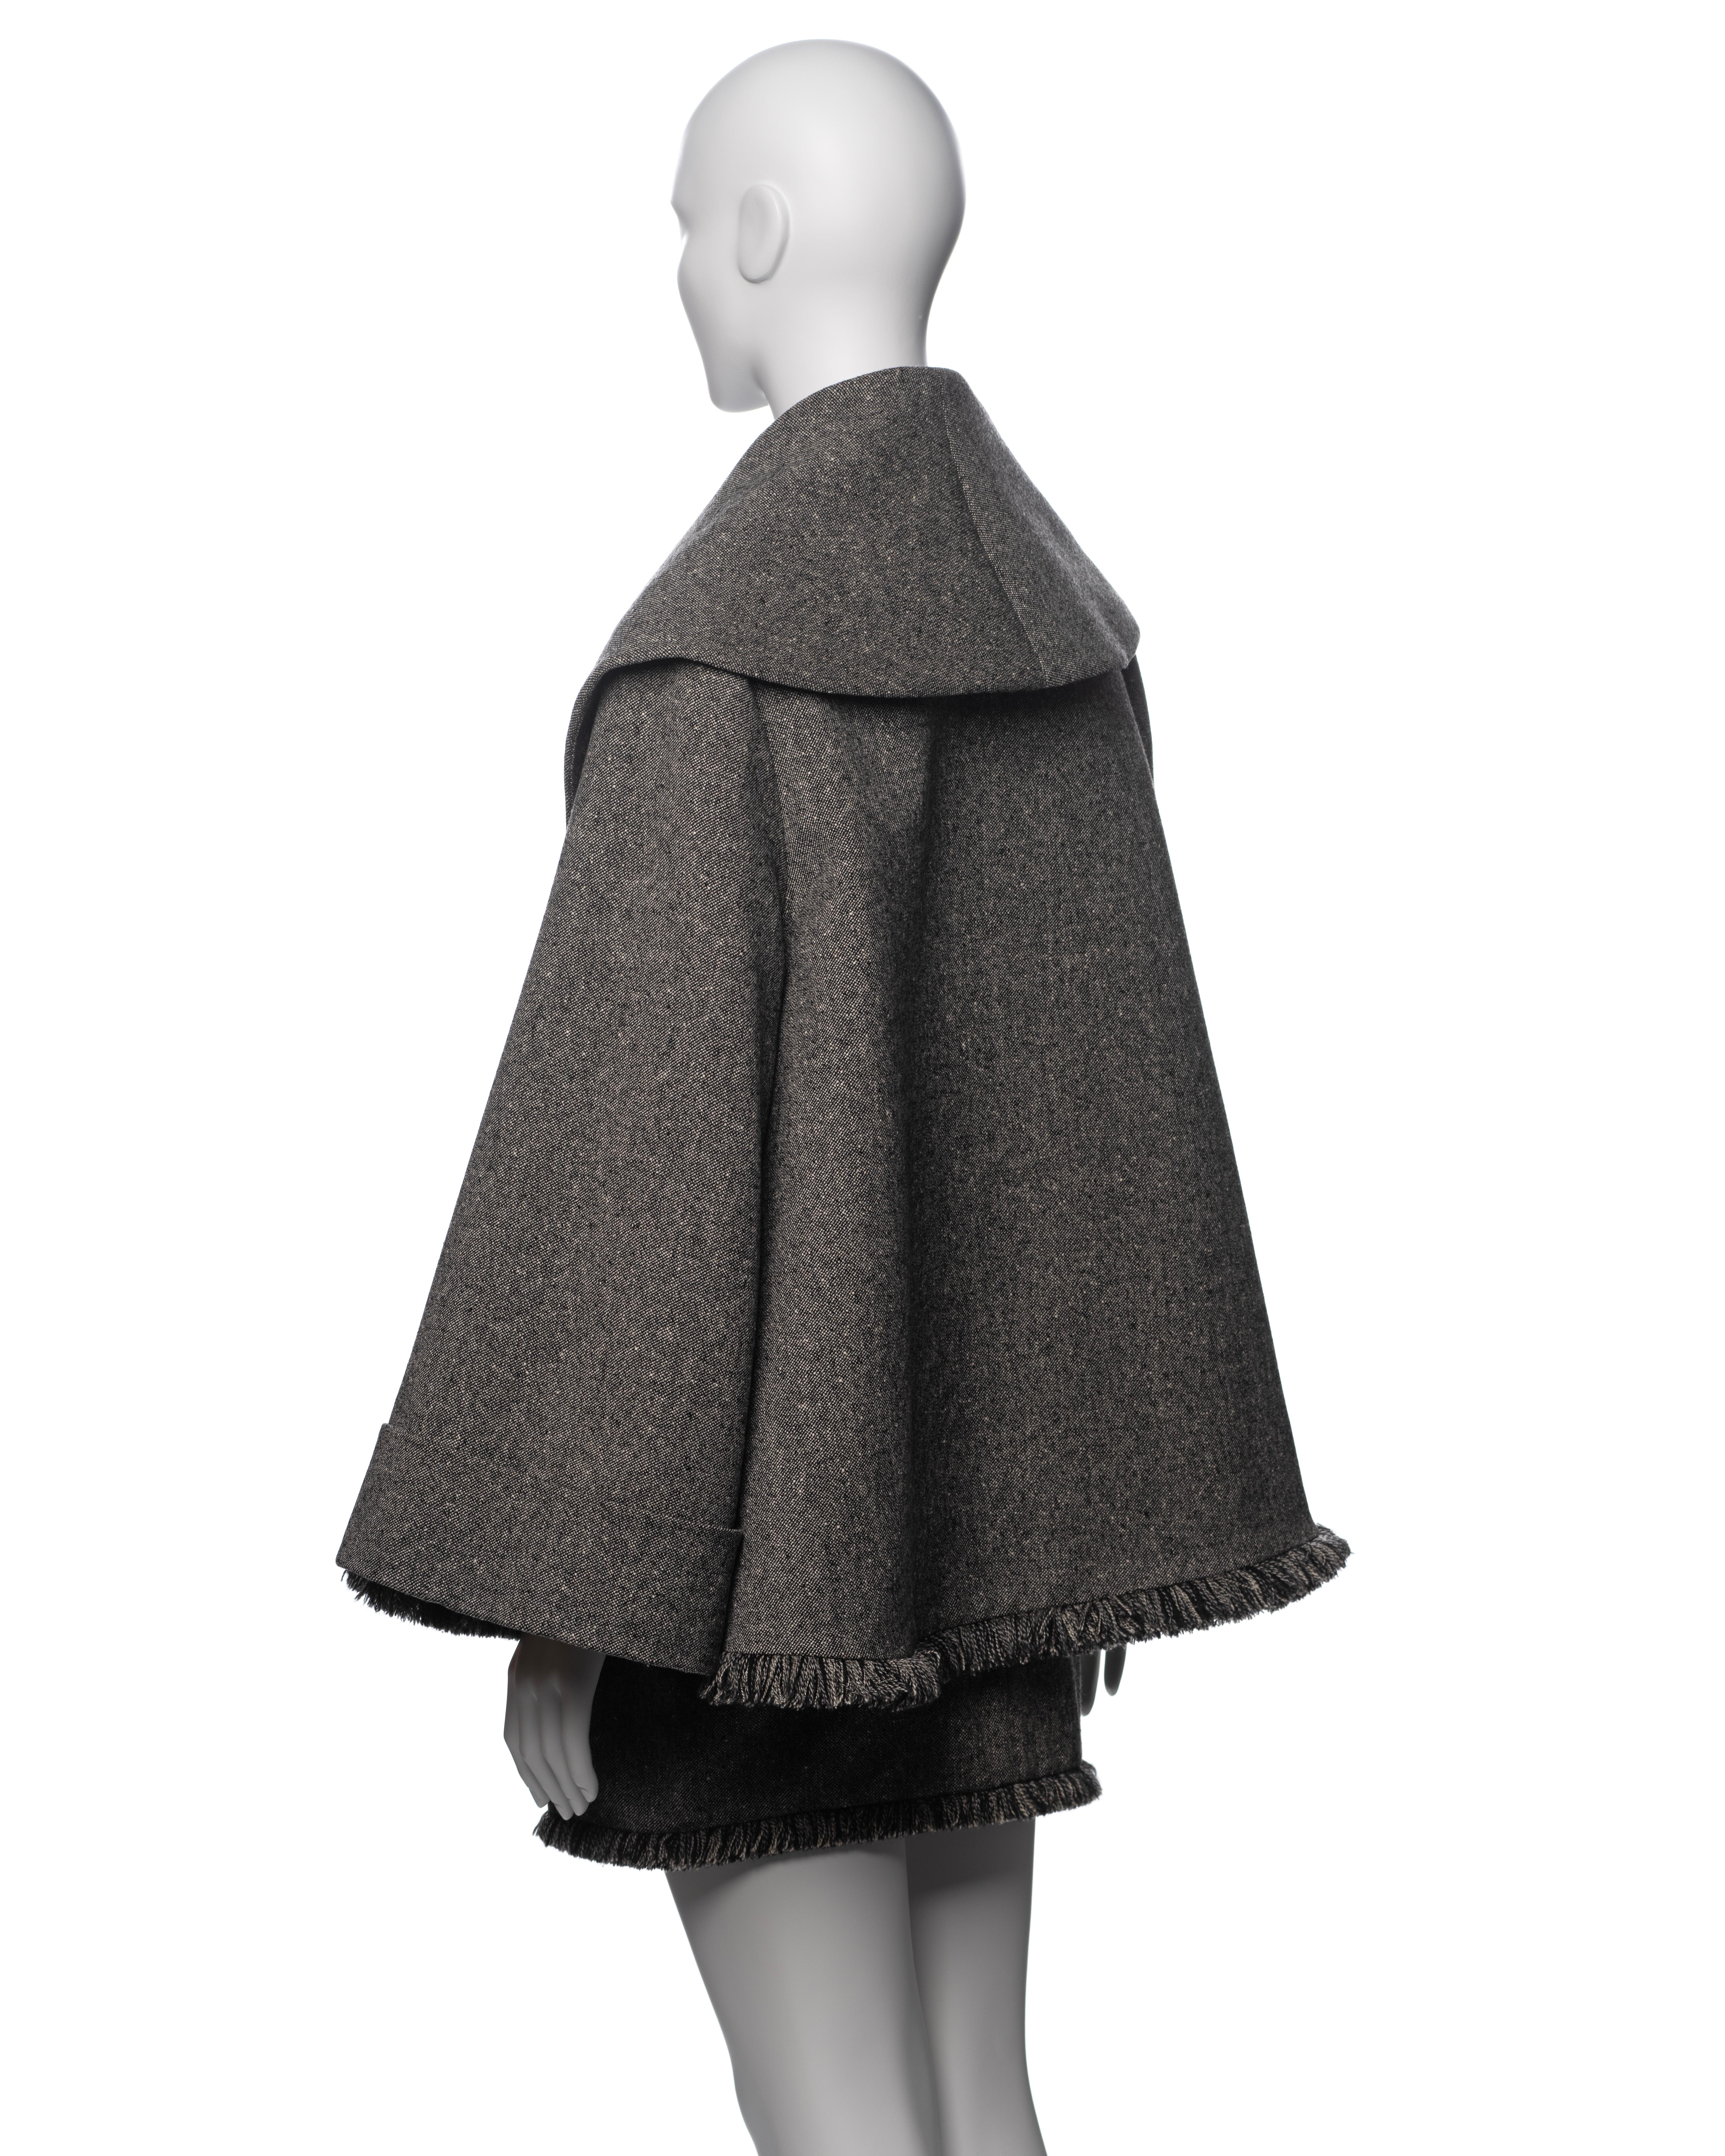 Christian Dior by John Galliano Grey Tweed Jacket and Mini Skirt Suit, FW 1998 For Sale 3